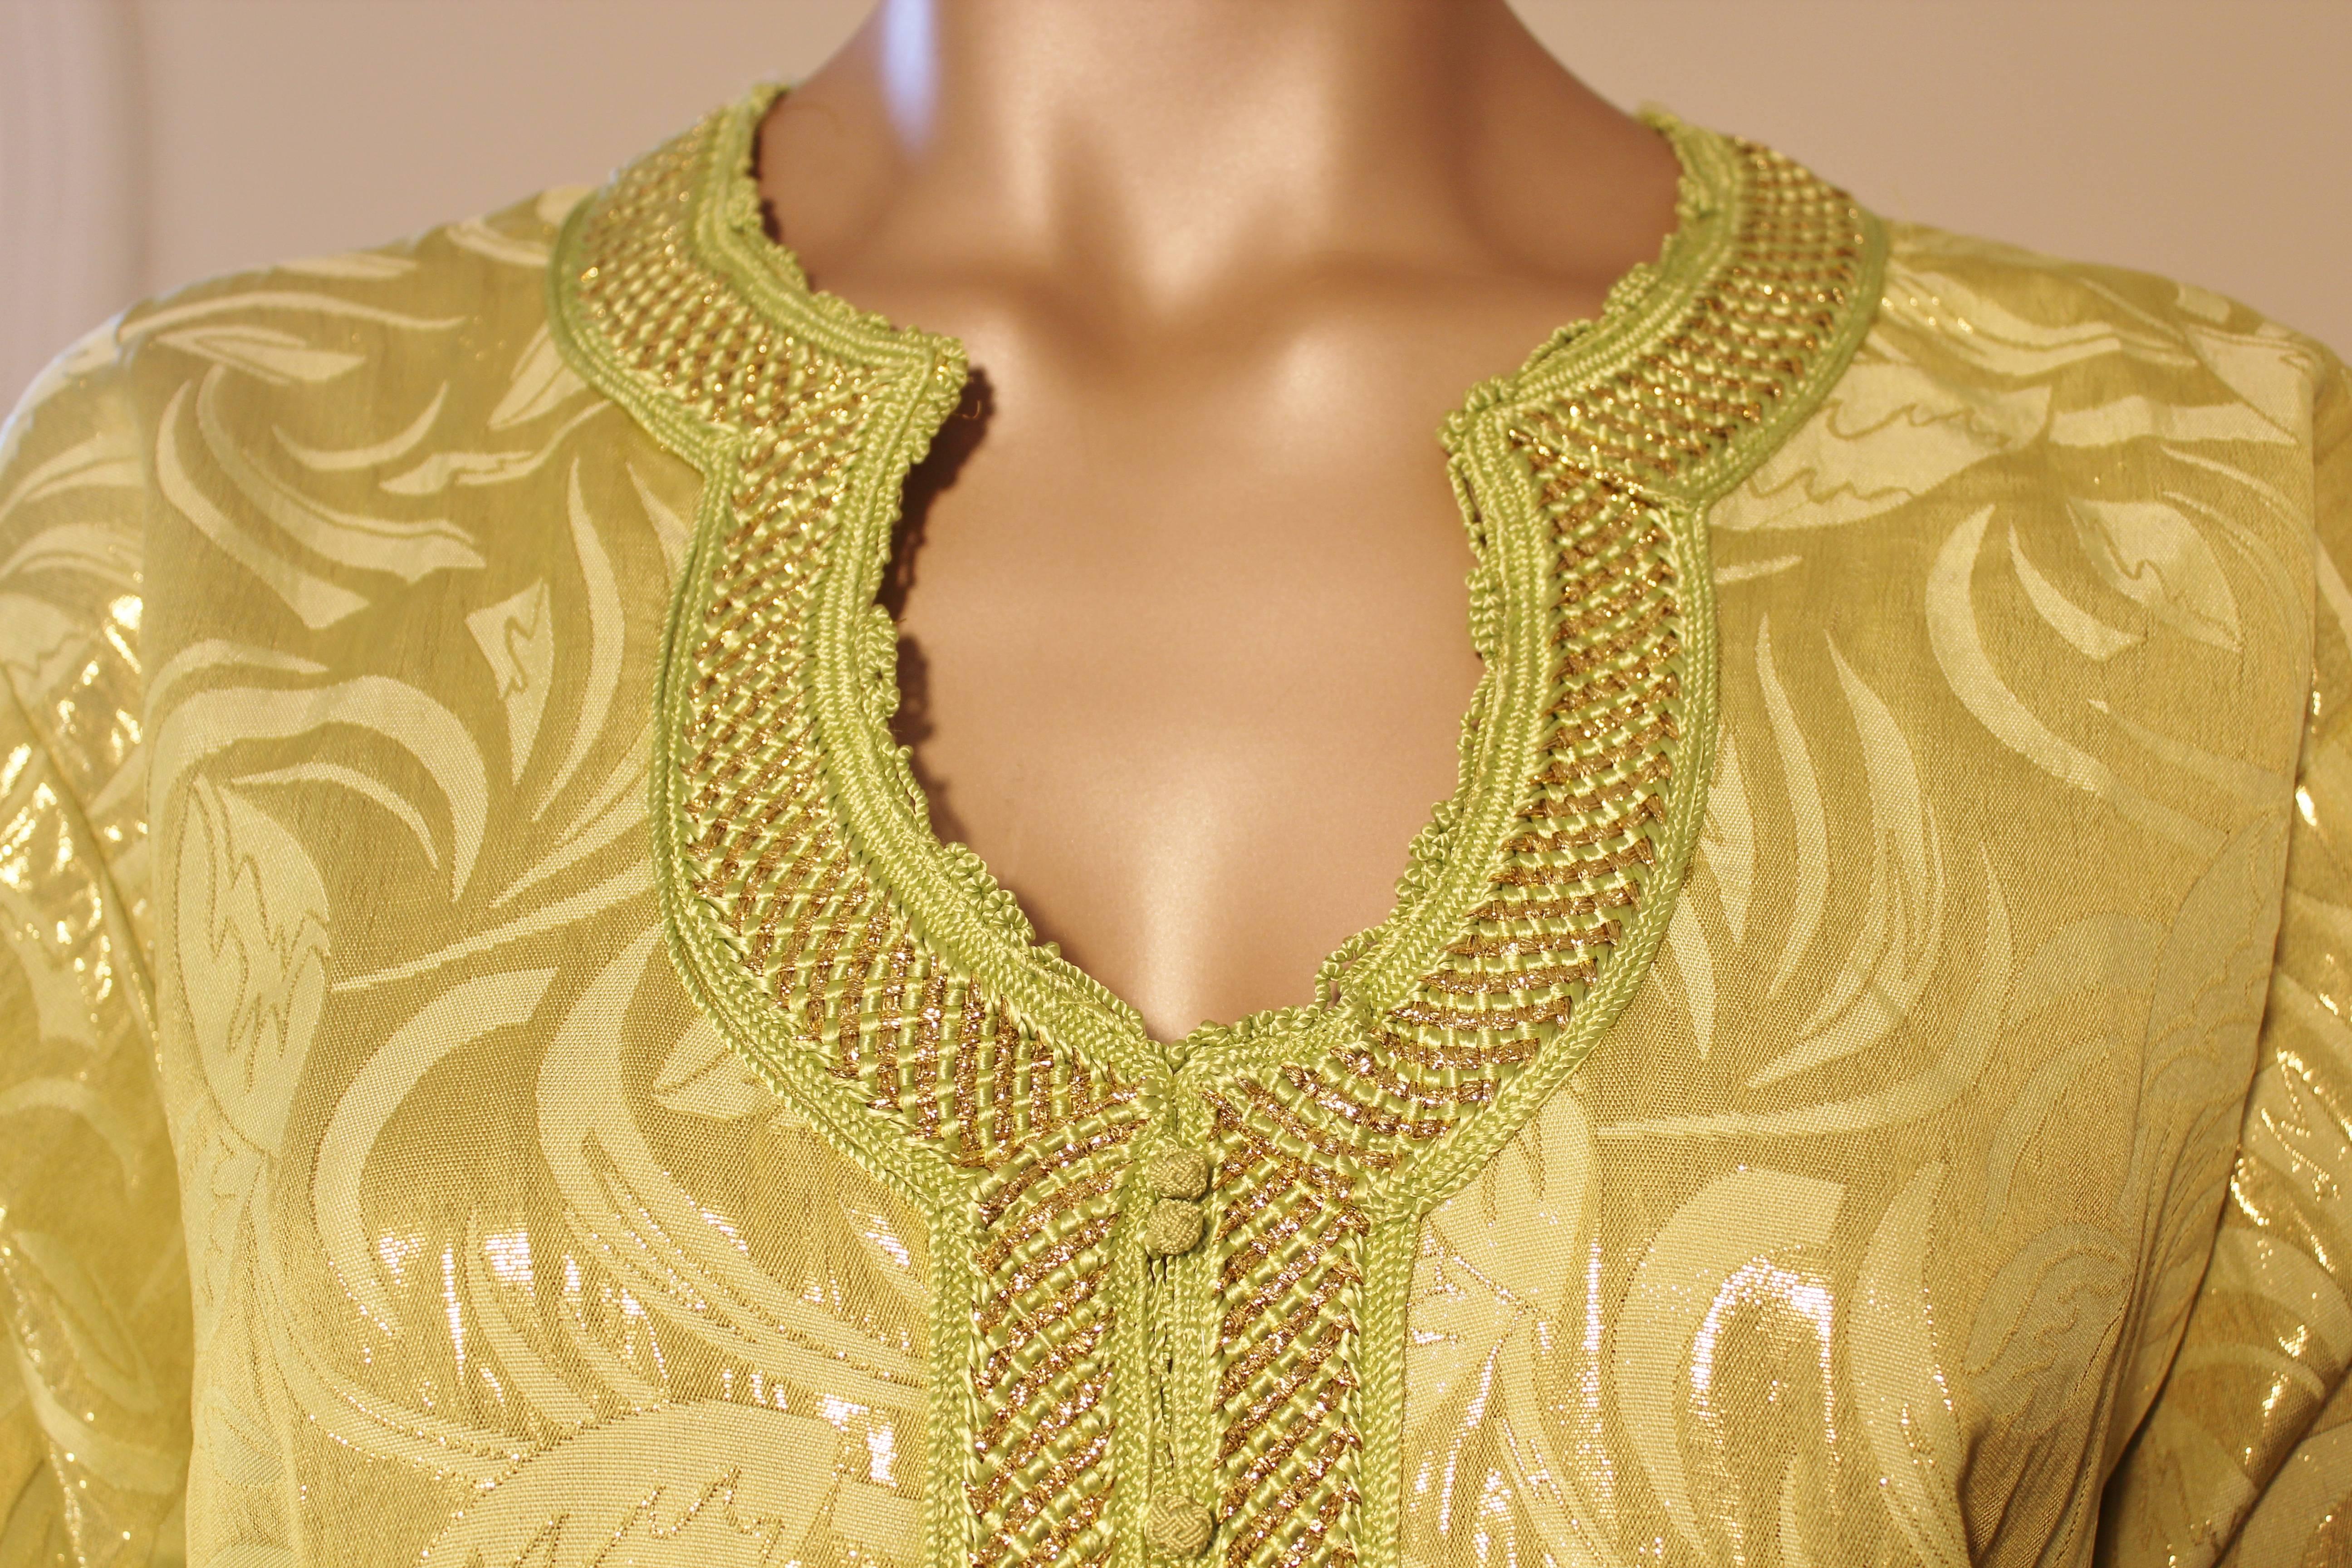 Hand-Crafted Moroccan Moorish Caftan Gown in Gold Brocade Maxi Dress Kaftan Size M to L For Sale